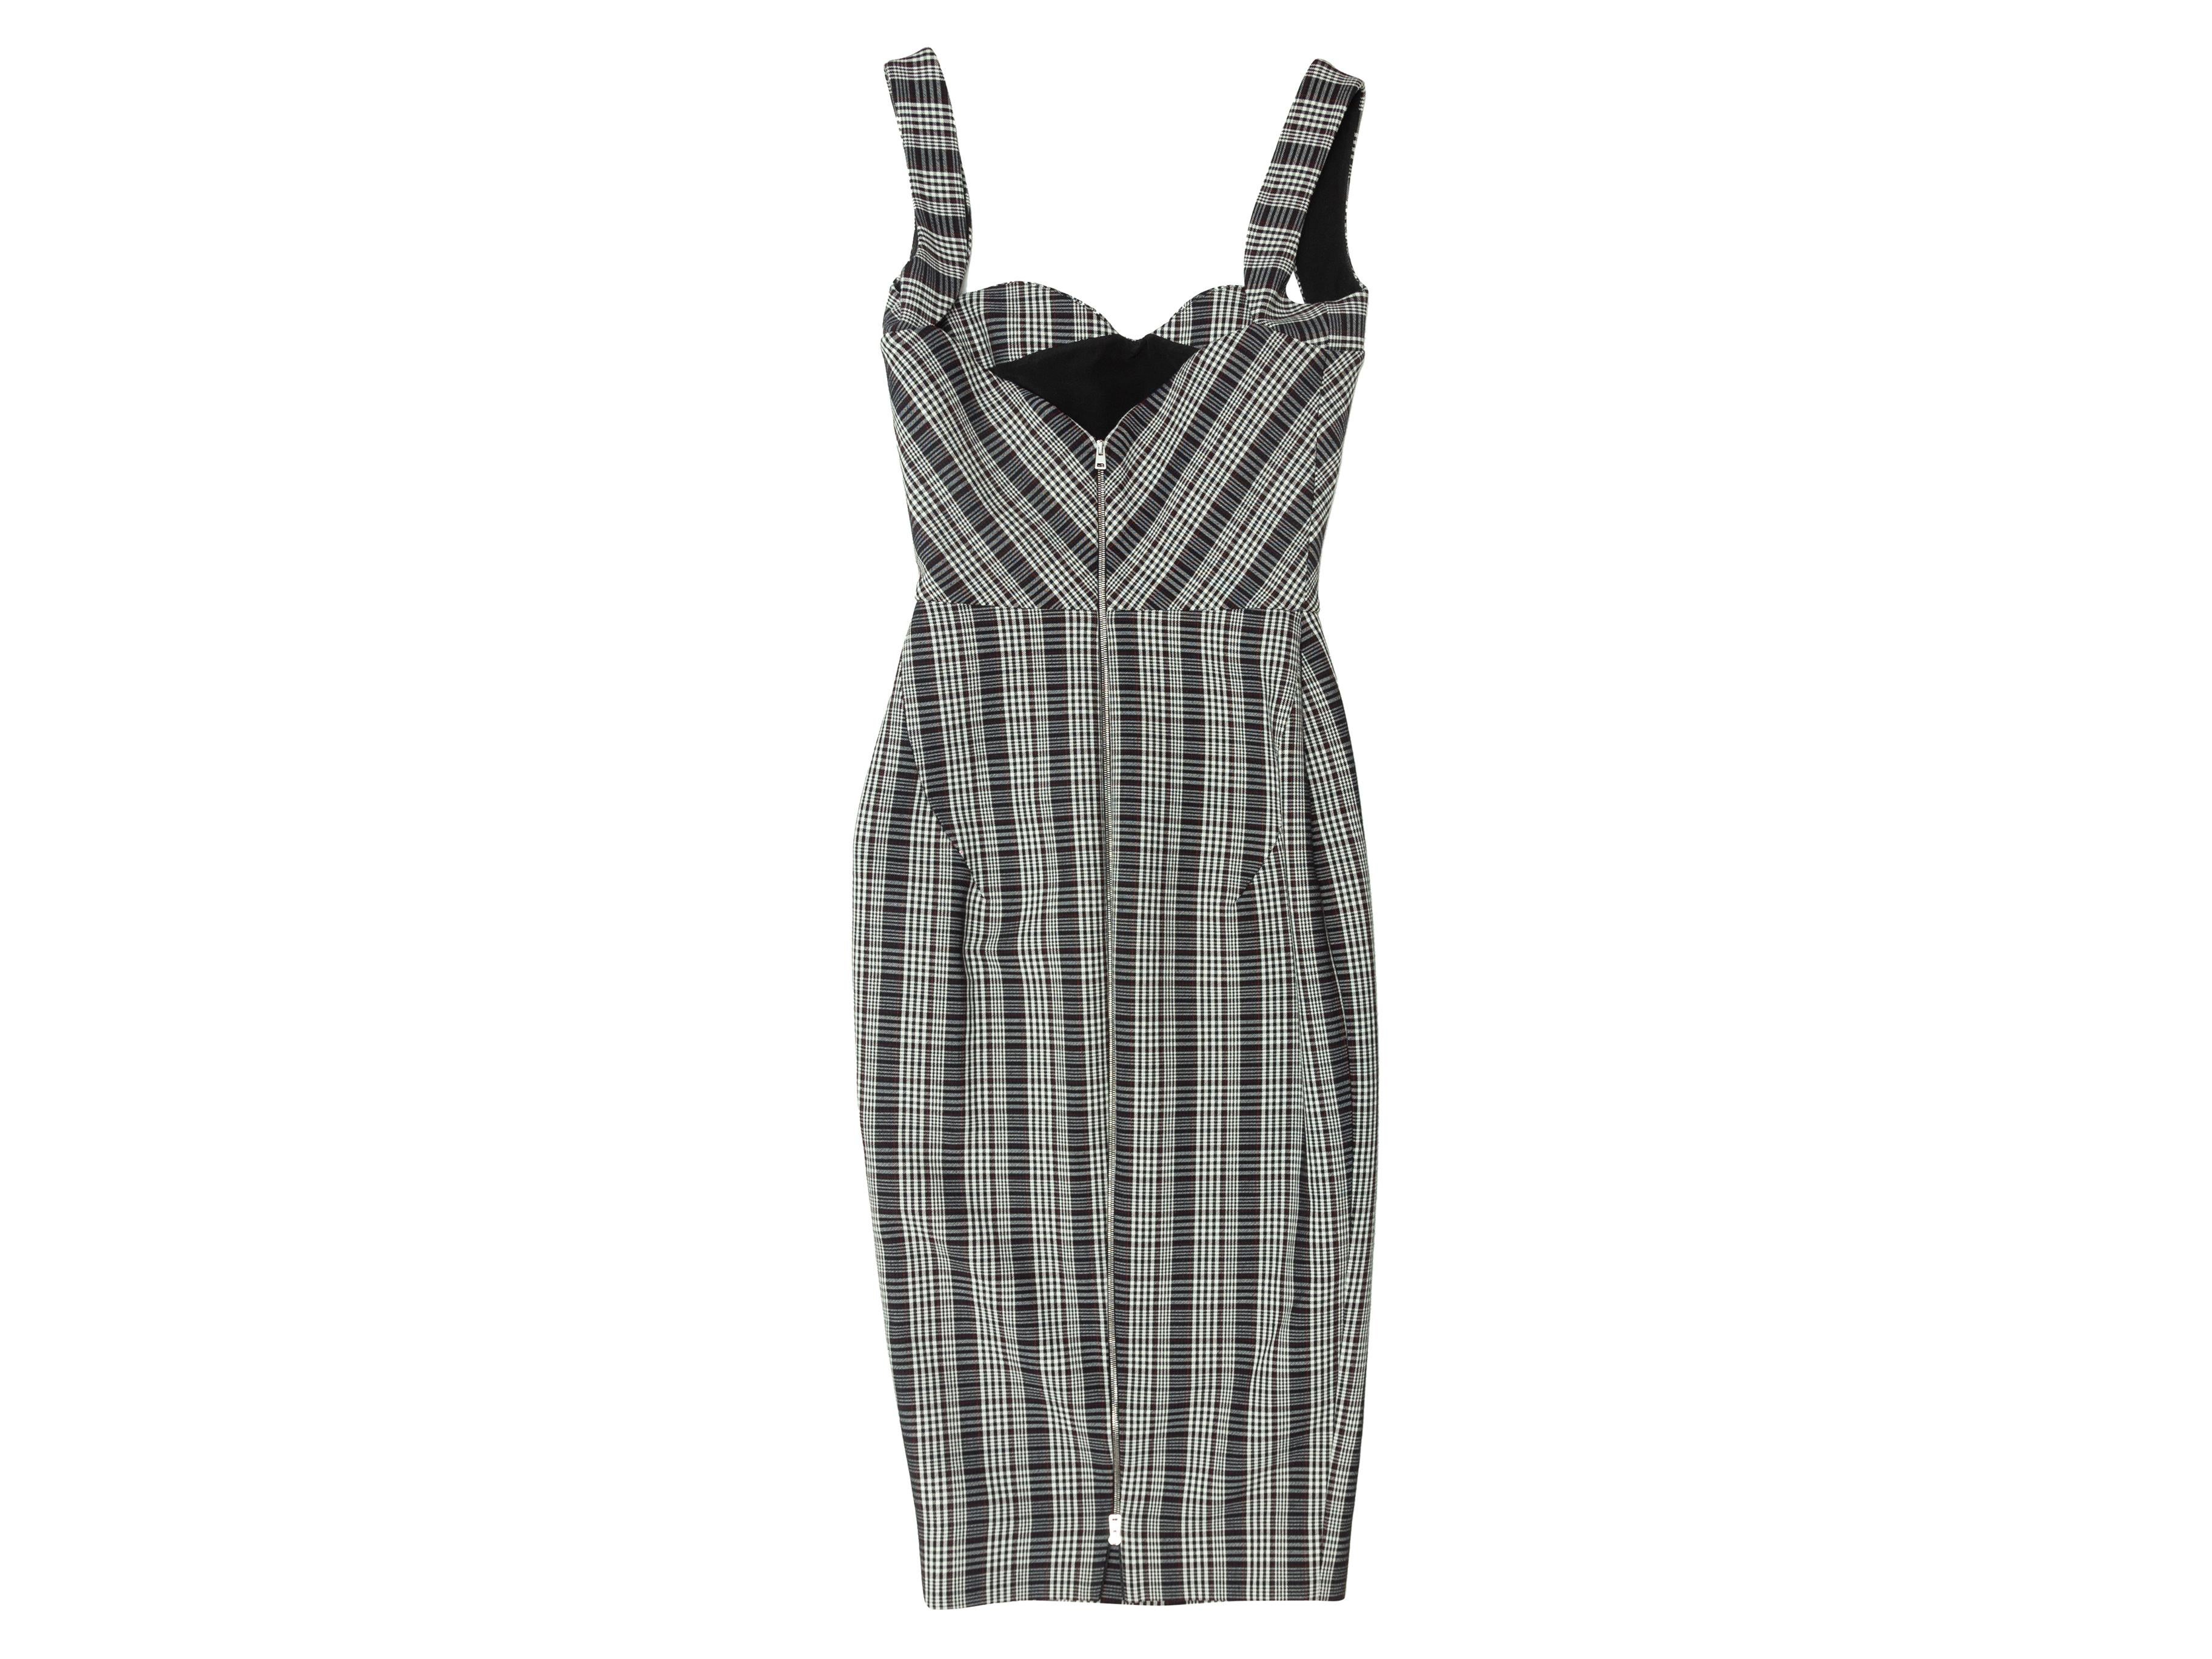 Product details:  Multicolor plaid sheath dress by Victoria Beckham.  Sweetheart neck.  Sleeveless.  Exposed back zip closure.  Silvertone hardware.  30